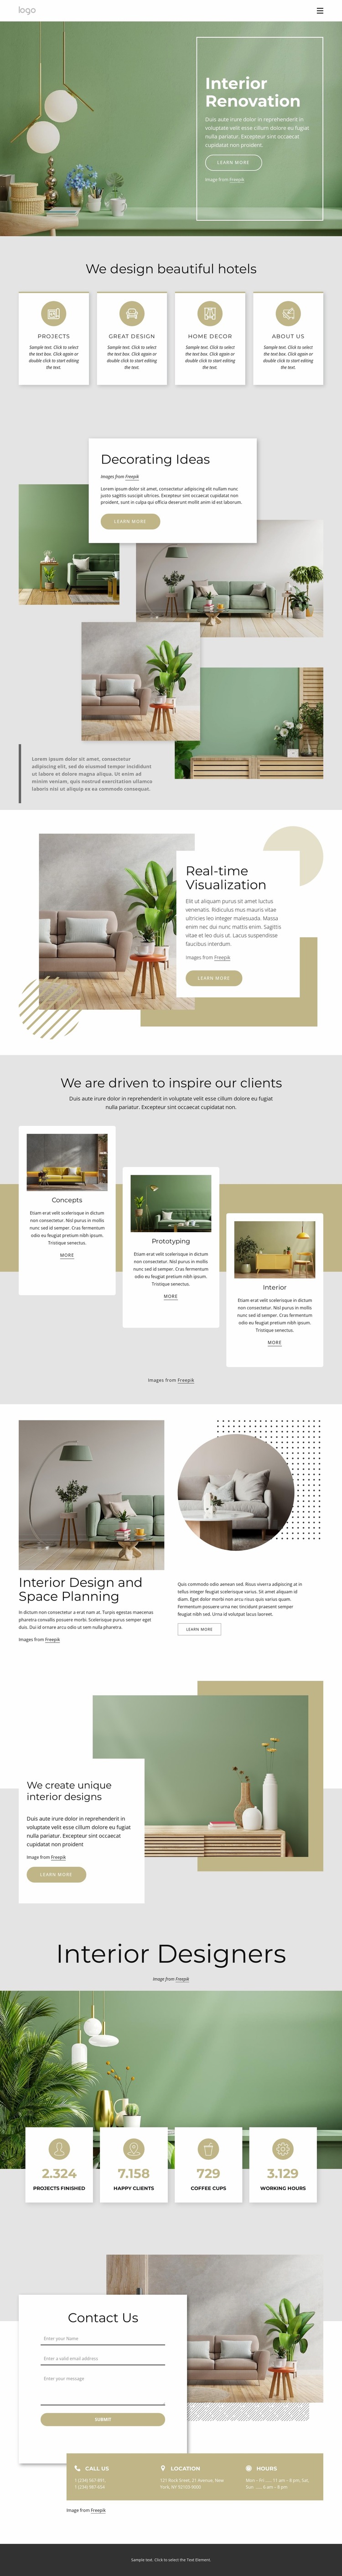 Architecture and interior design agency Website Mockup